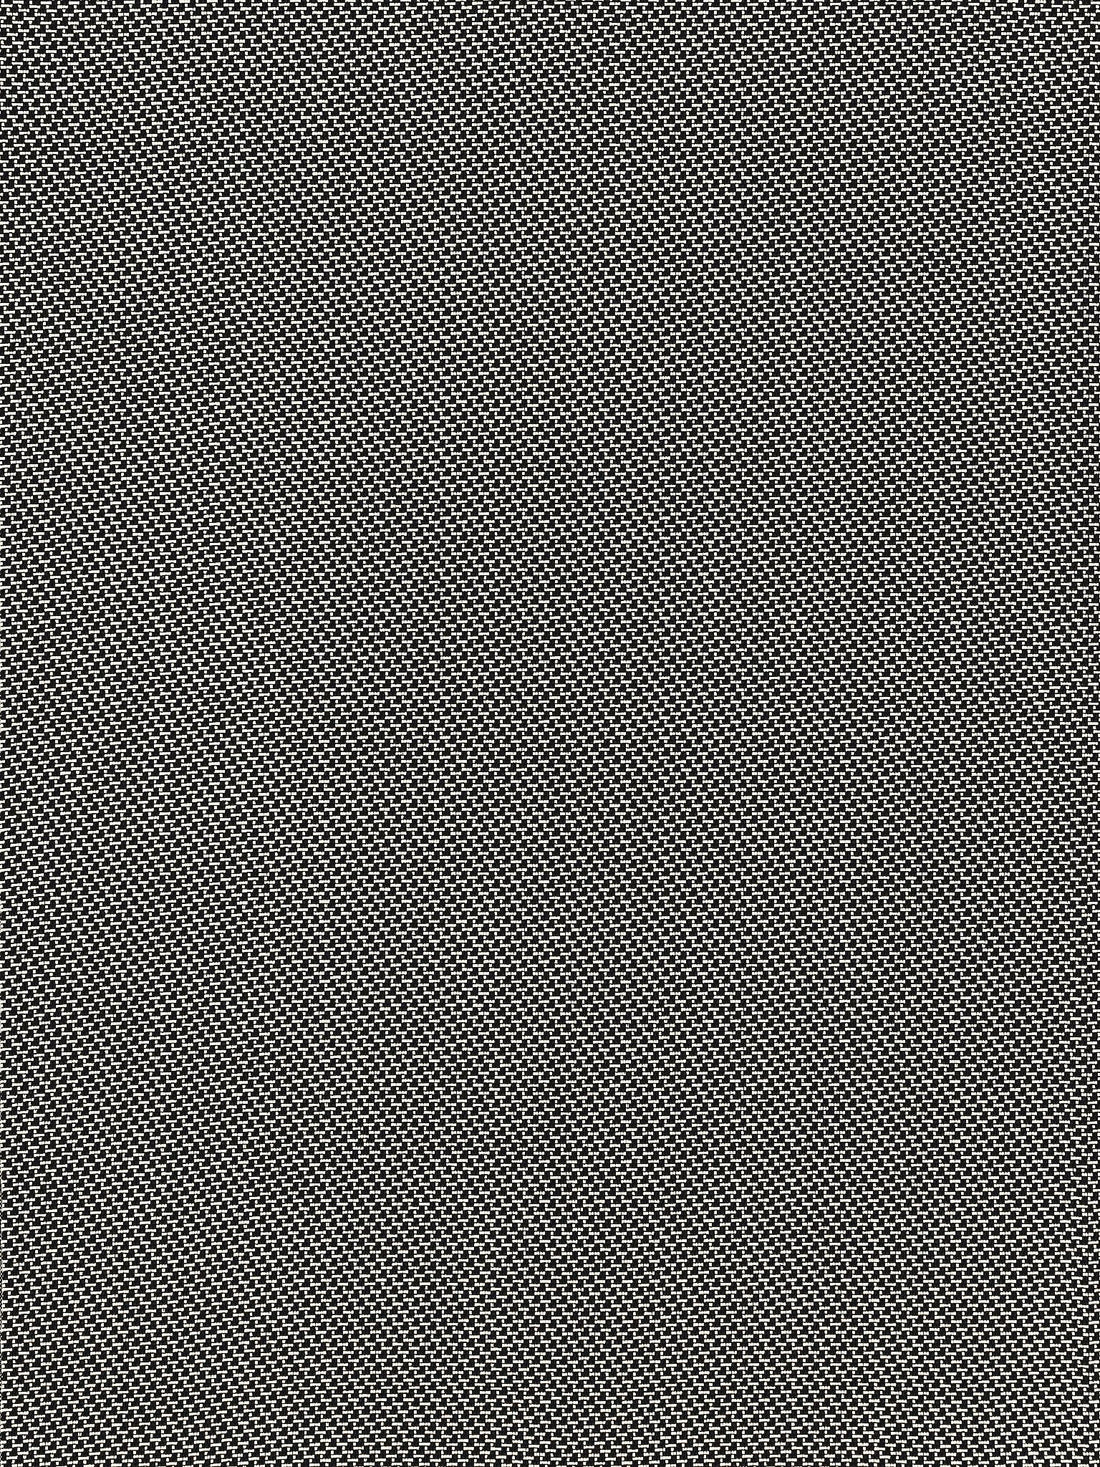 North Downs fabric in onyx color - pattern number EY 000513ND - by Scalamandre in the Old World Weavers collection